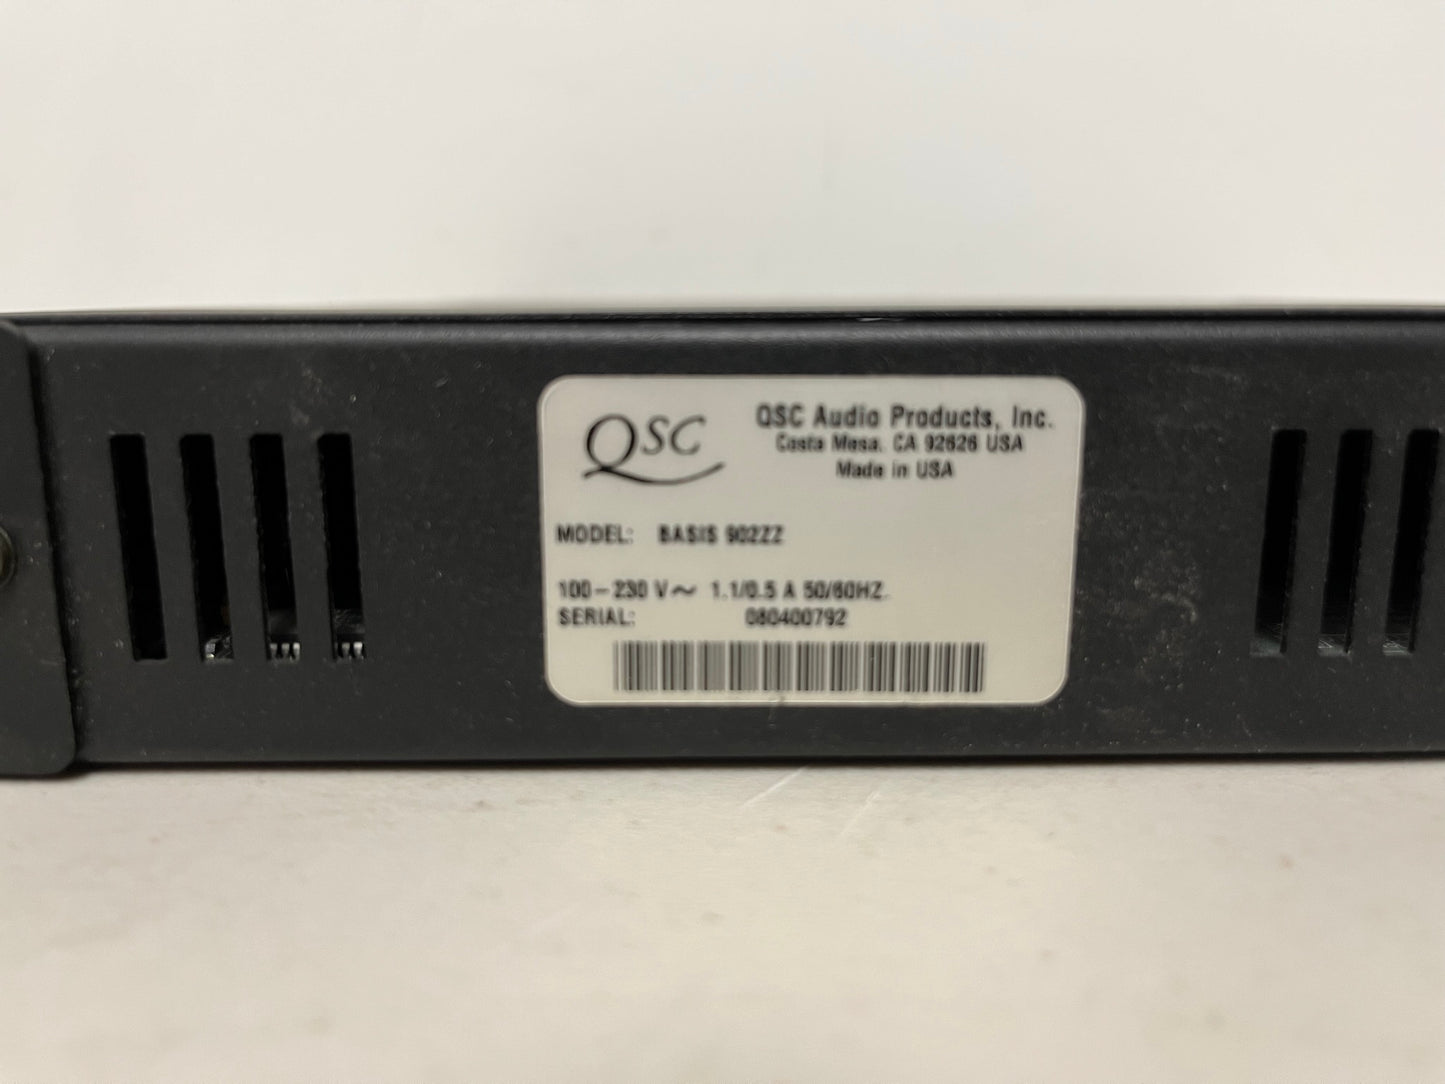 Used QSC Basis 902zz Amplifier Control Processing, DSP & CobraNet for Sale. We Sell Professional Audio Equipment. Audio Systems, Amplifiers, Consoles, Mixers, Electronics, Entertainment, Sound, Live.